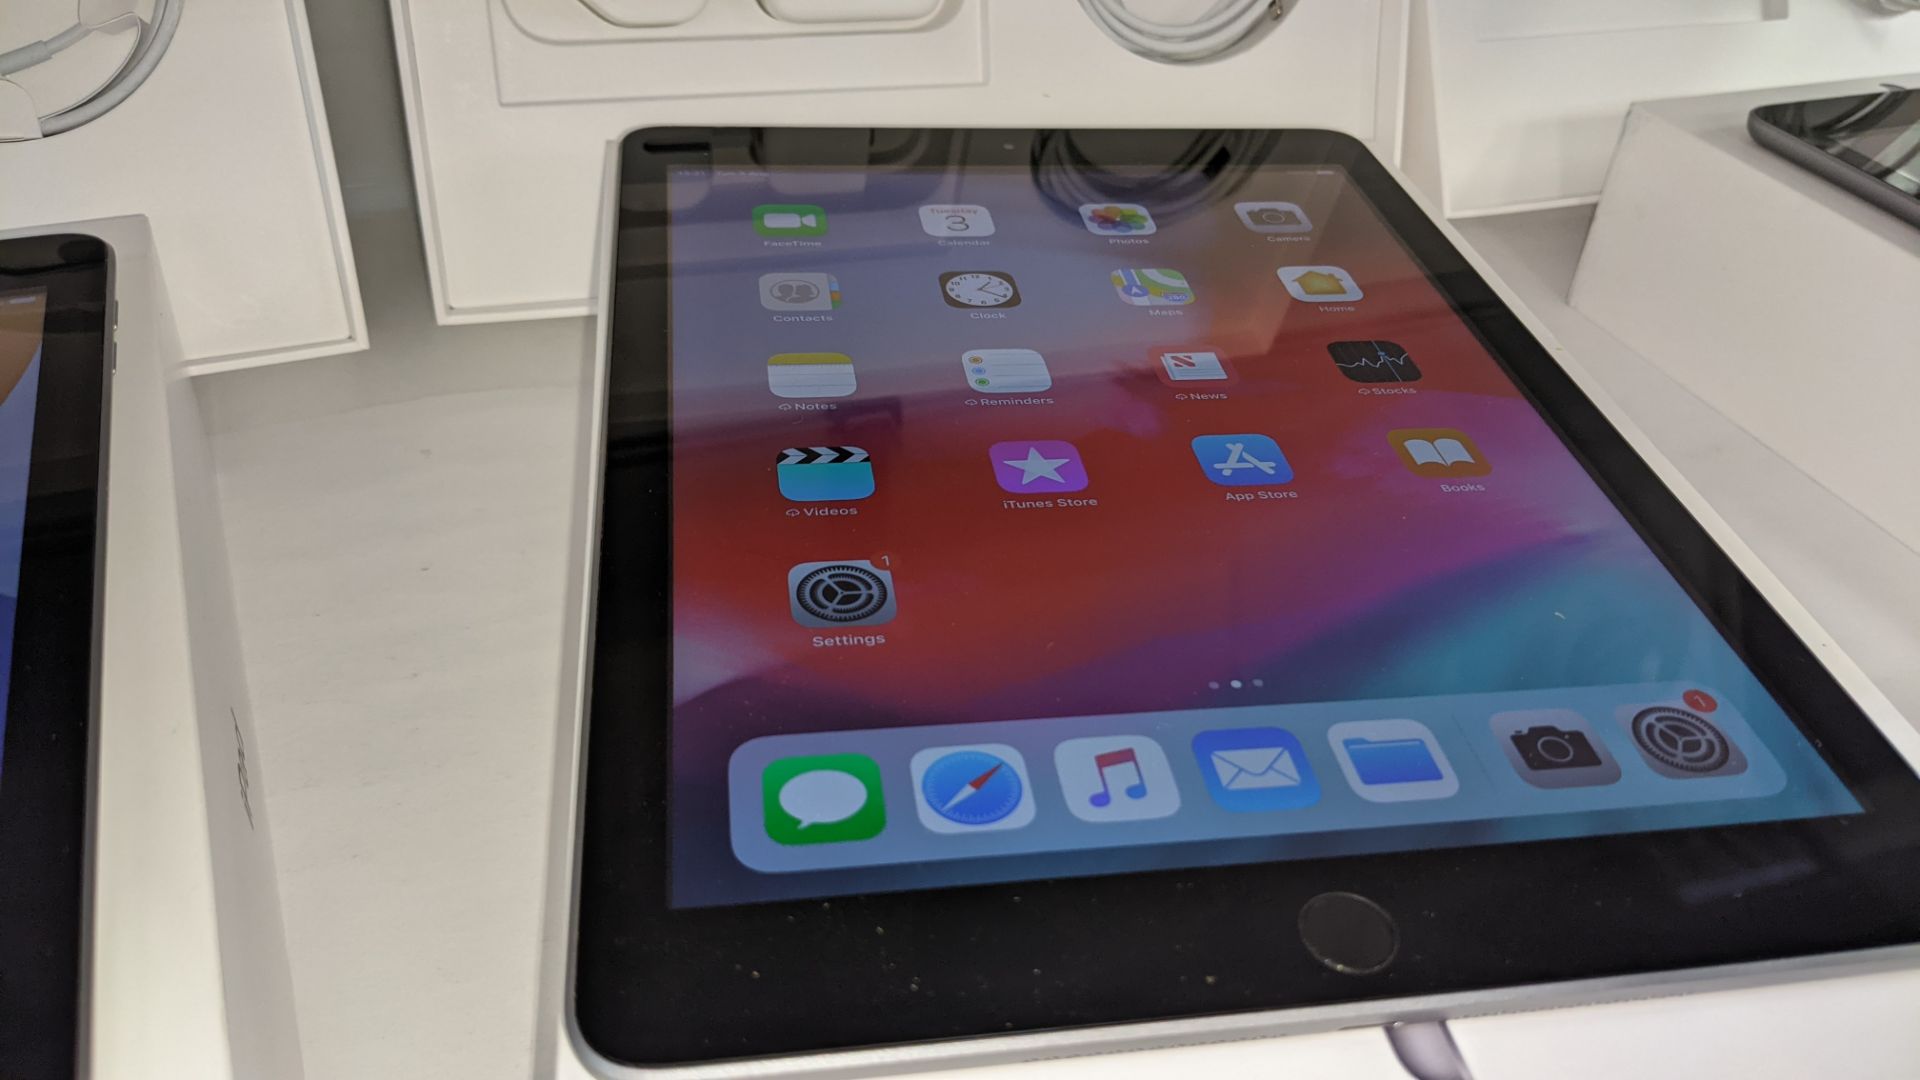 Apple iPad (space grey) 5th generation 32Gb Wi-Fi 9.7" Retina screen. Product code A1822. Apple A9 - Image 4 of 11